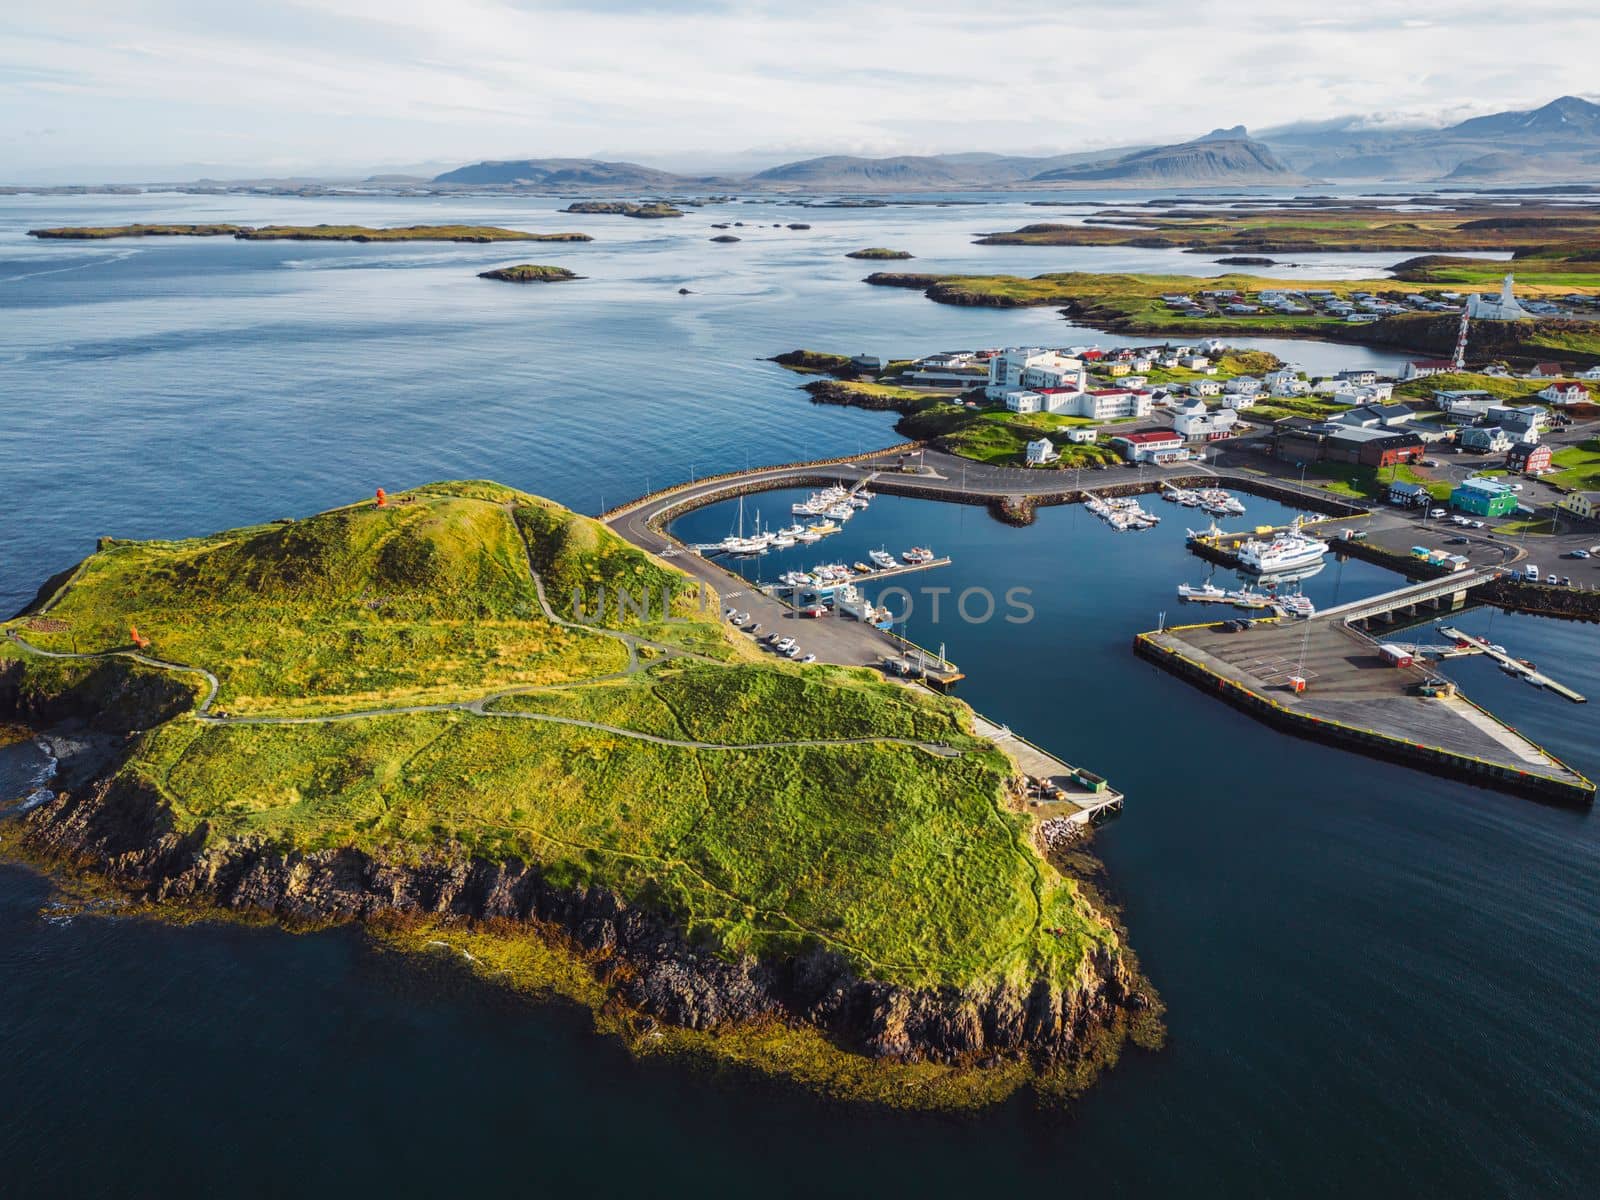 Beautiful aerial view of the Stykkisholmskirkja Harbor with Fishing ships boats at Stykkisholmur town in western Iceland. City view from Sugandisey Cliff with lighthouse. Famous colorful houses. September, autumn 2022.